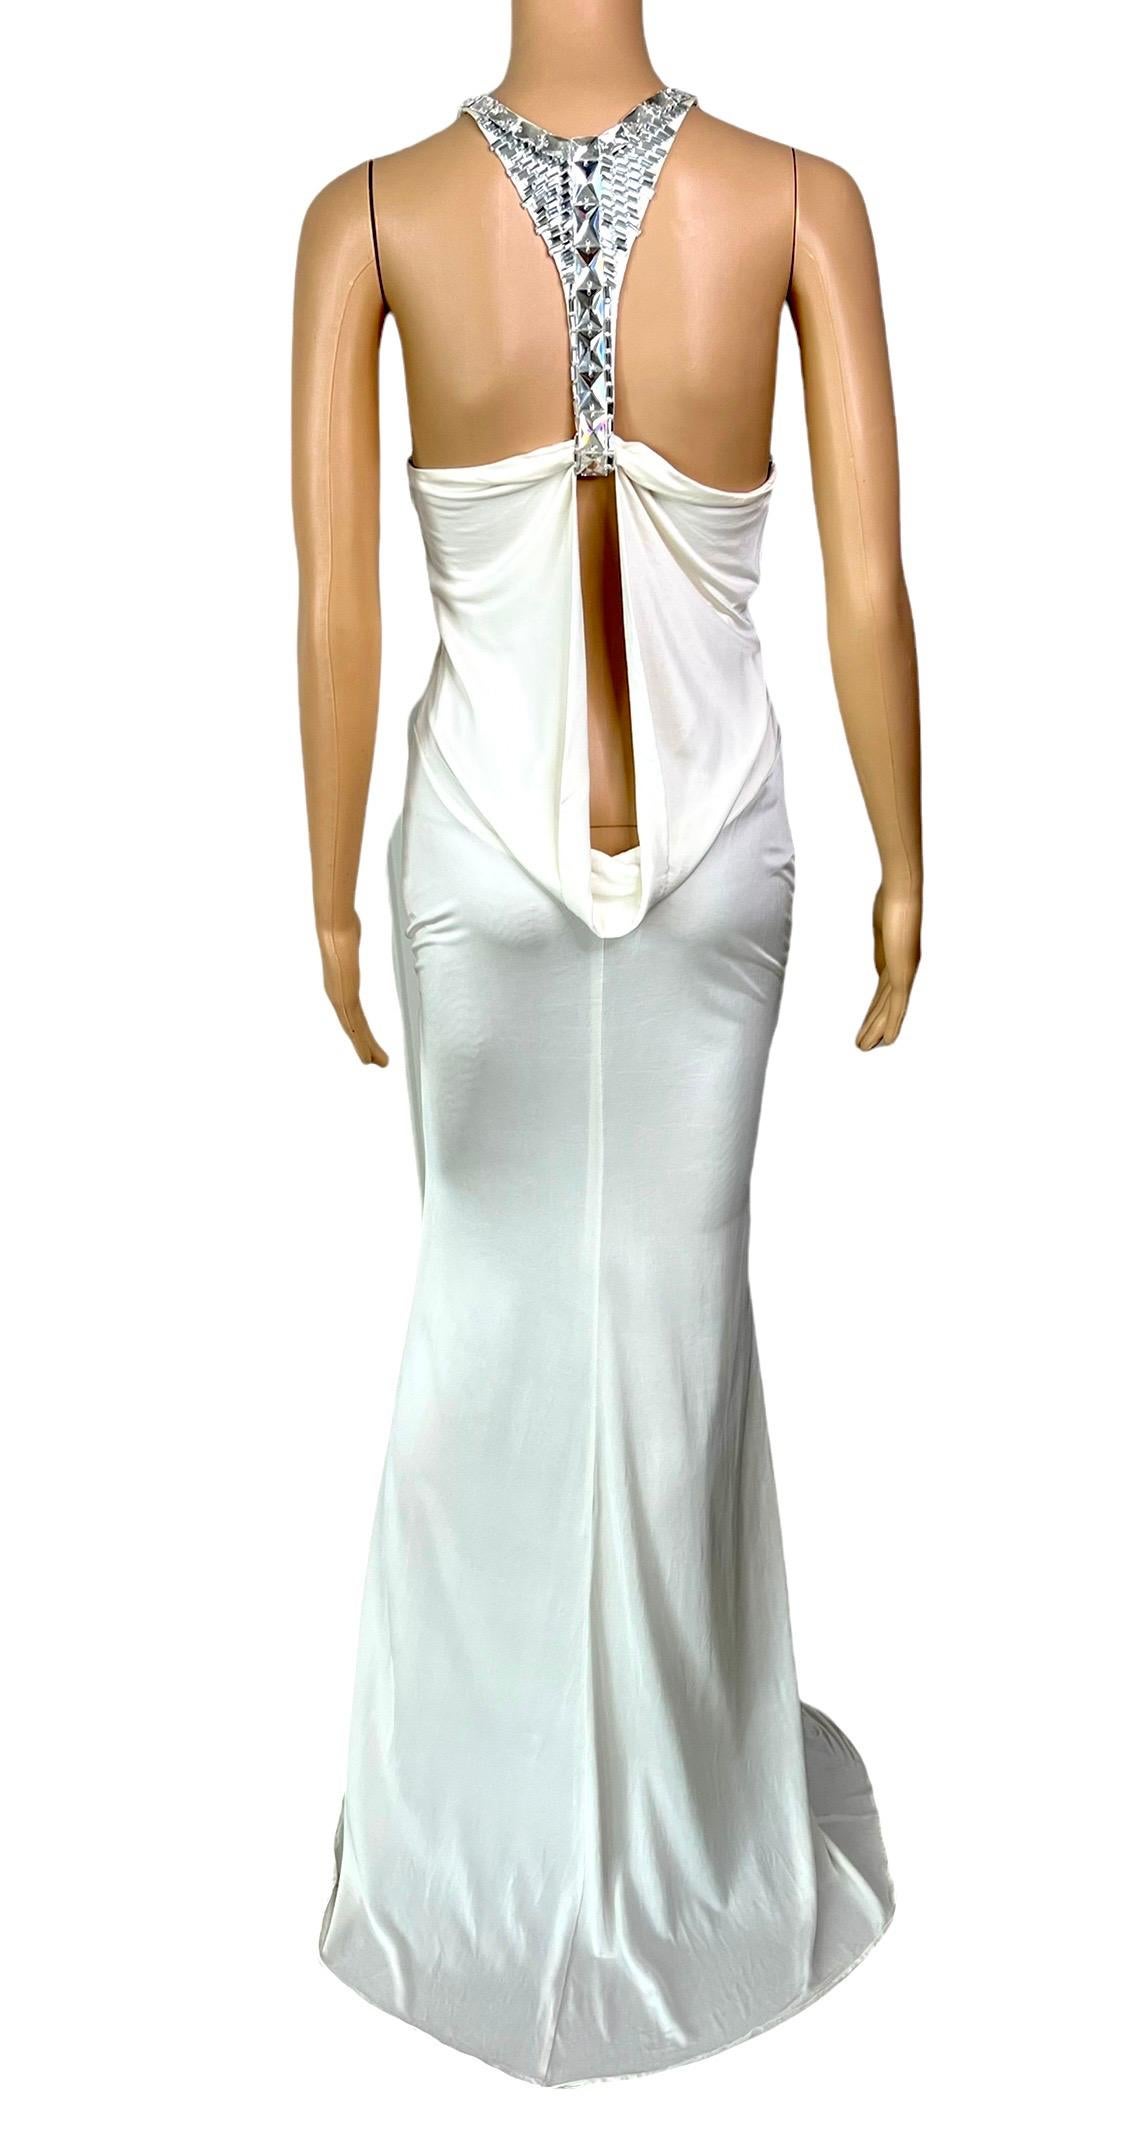 Tom Ford for Gucci F/W 2004 Embellished Plunging Cutout Ivory Evening Dress Gown For Sale 14